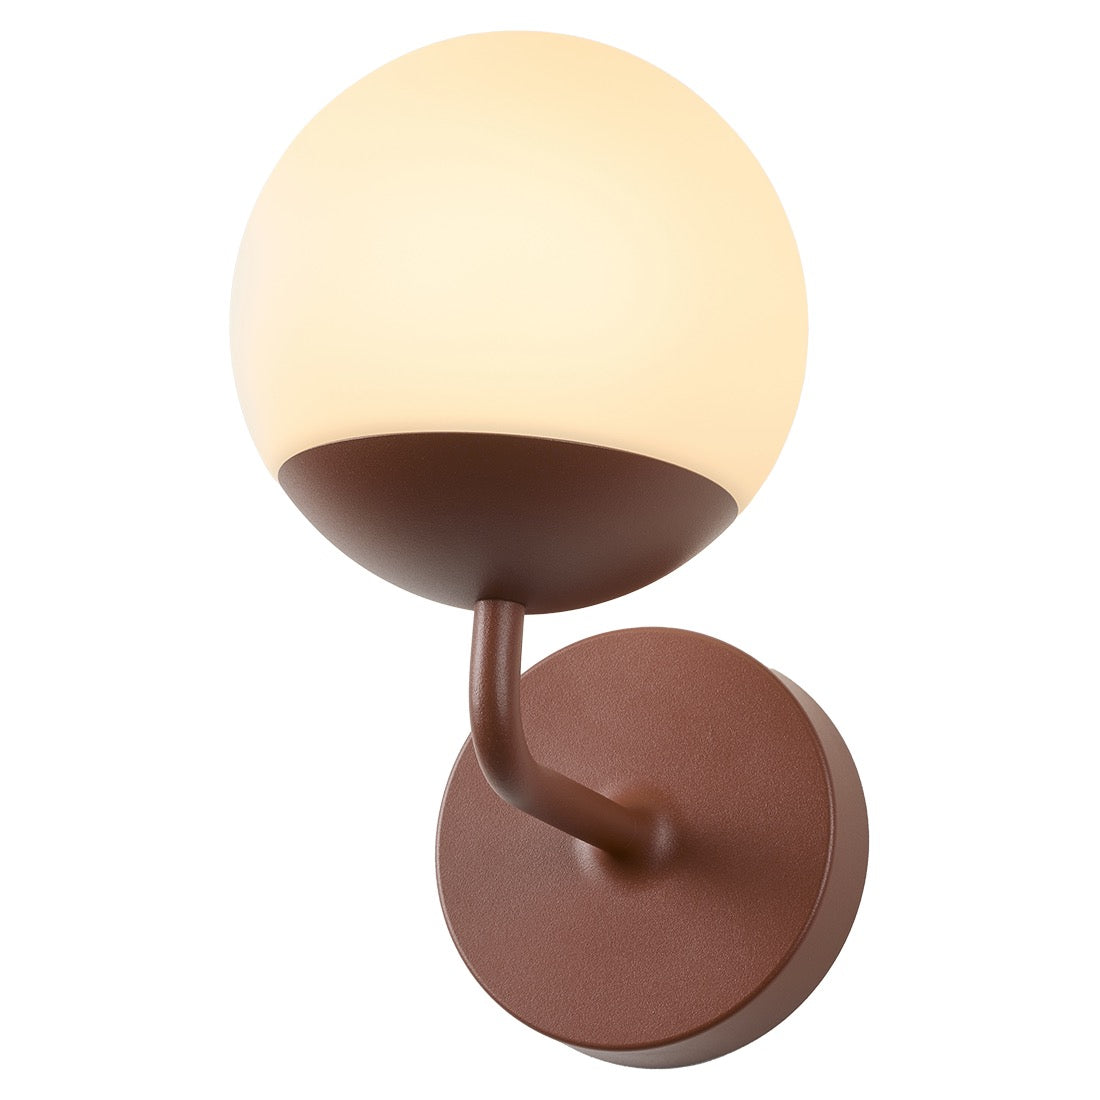 Fermob Mooon! Wall Lamp, designed by Tristan Lohner, in Red Ochre.